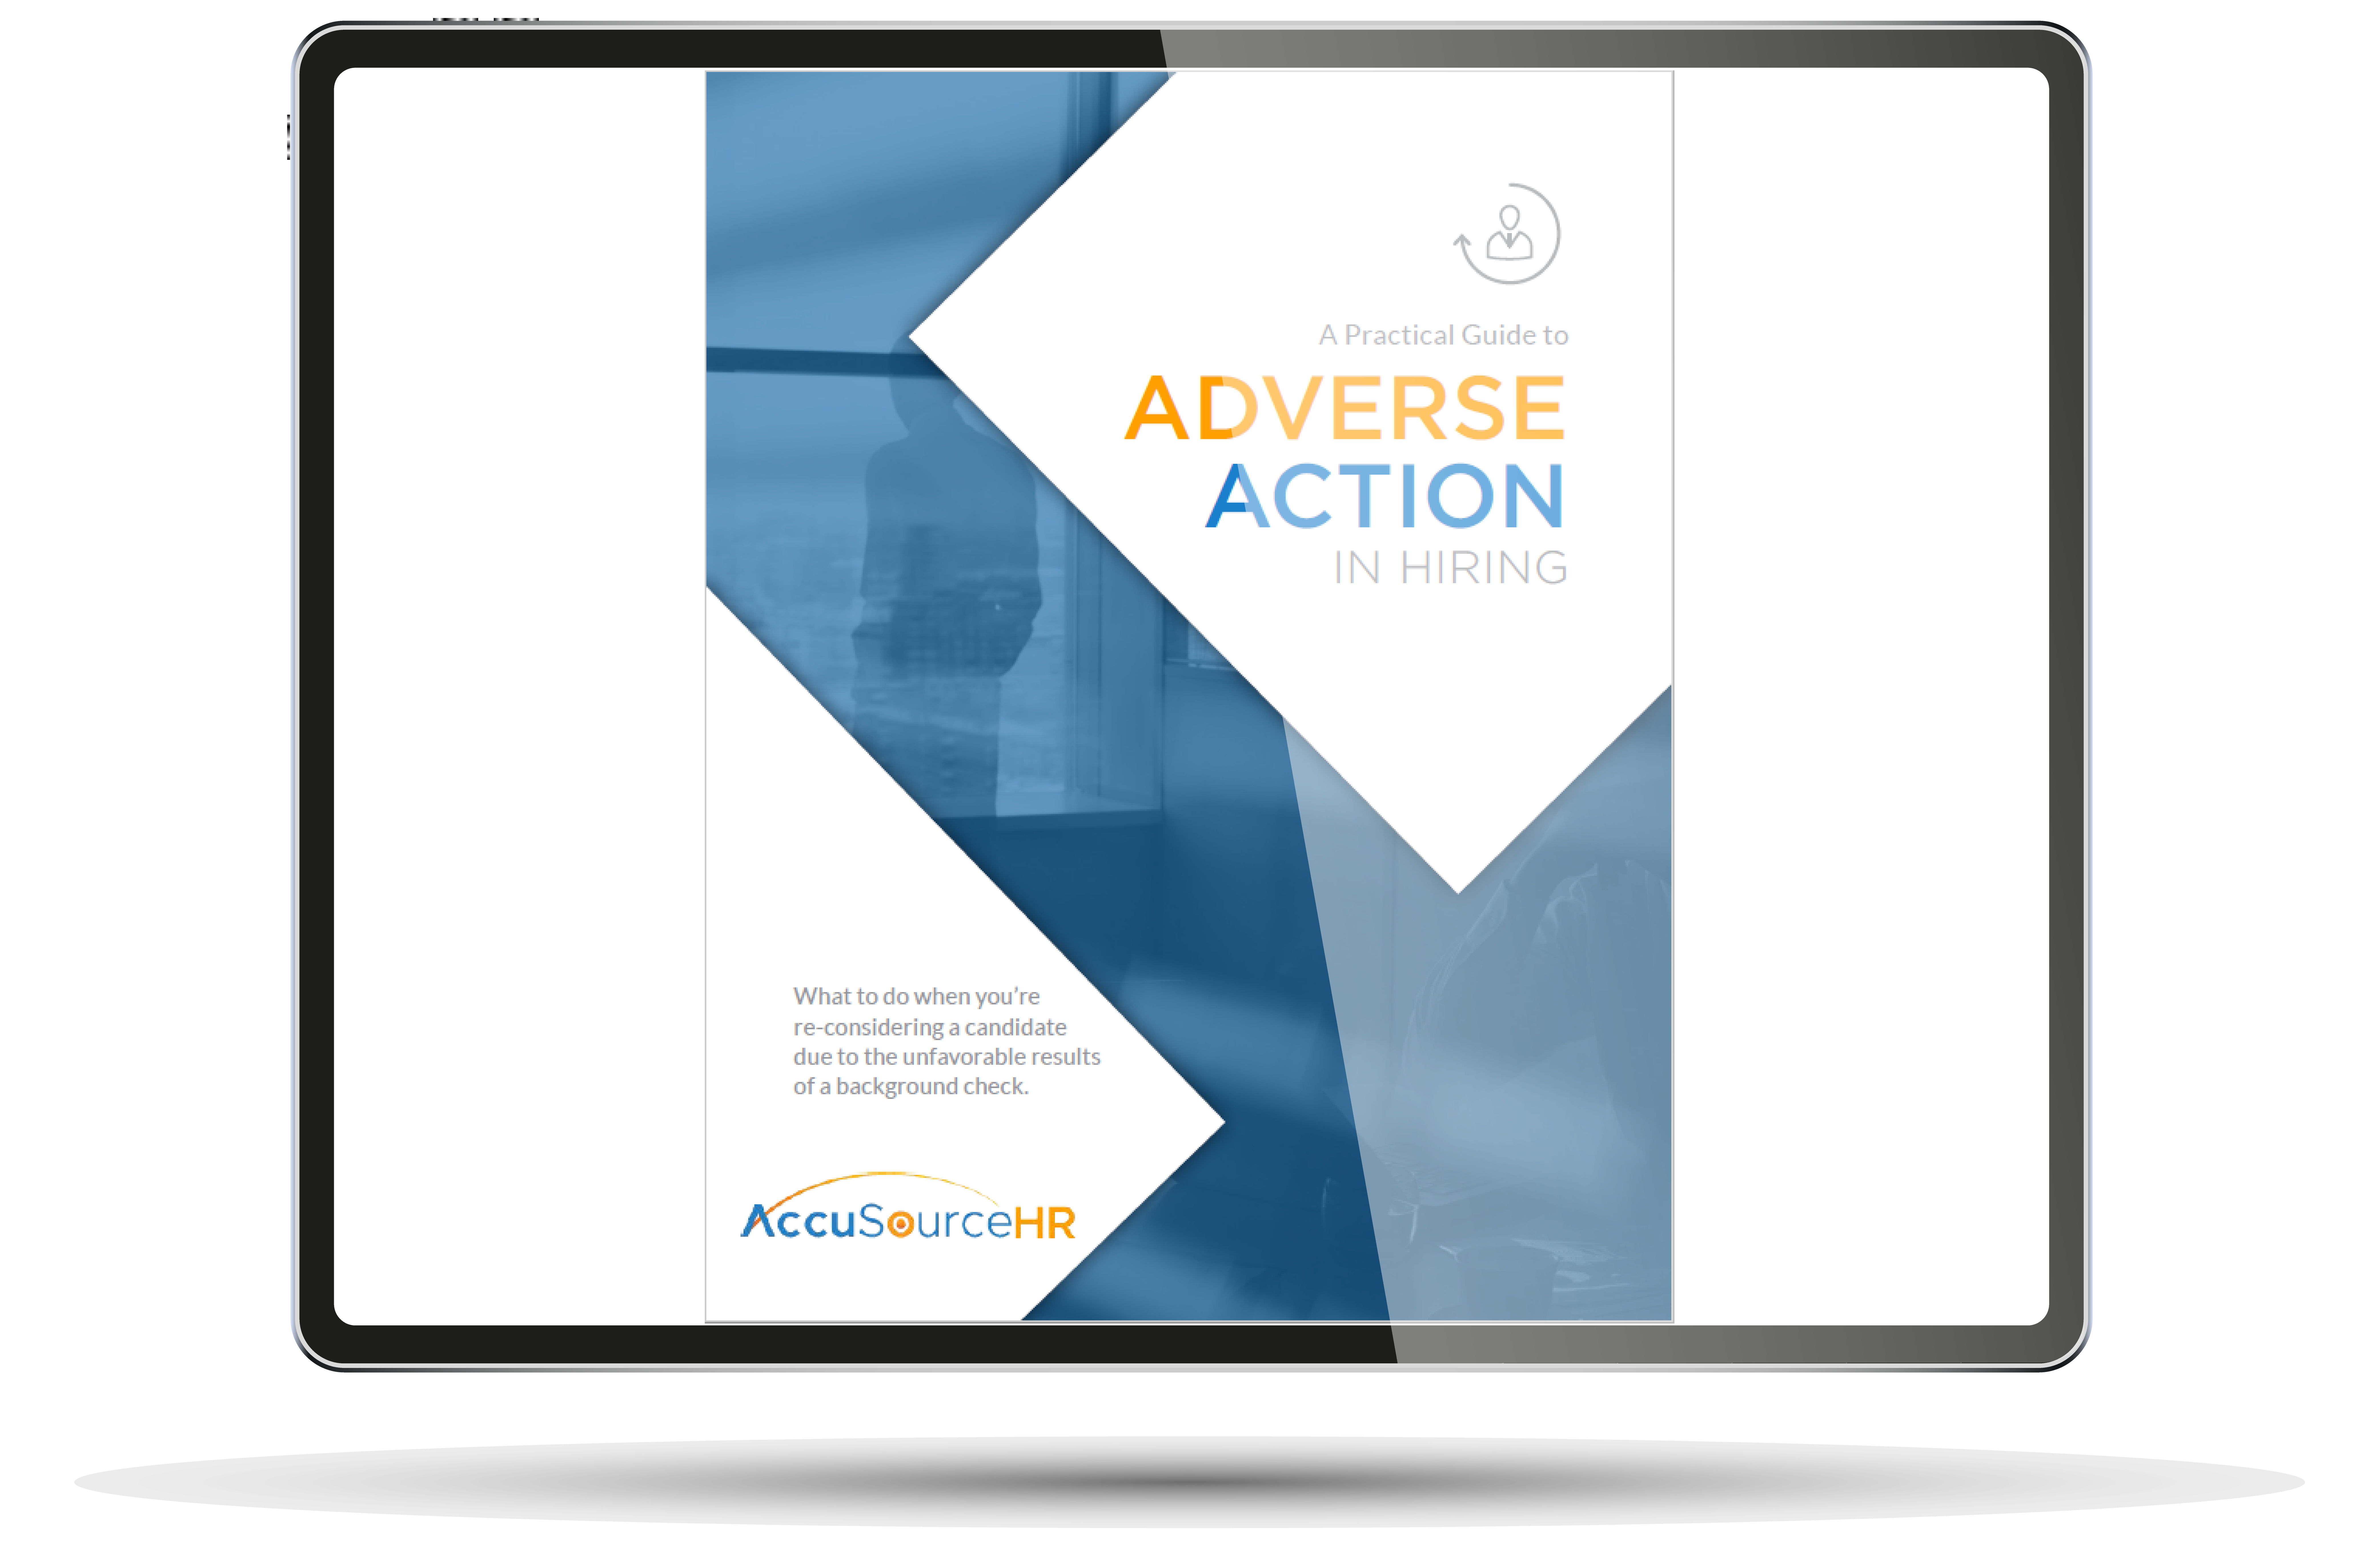 AccuSourceHR_A Practical Guide to Adverse Action in Hiring-01